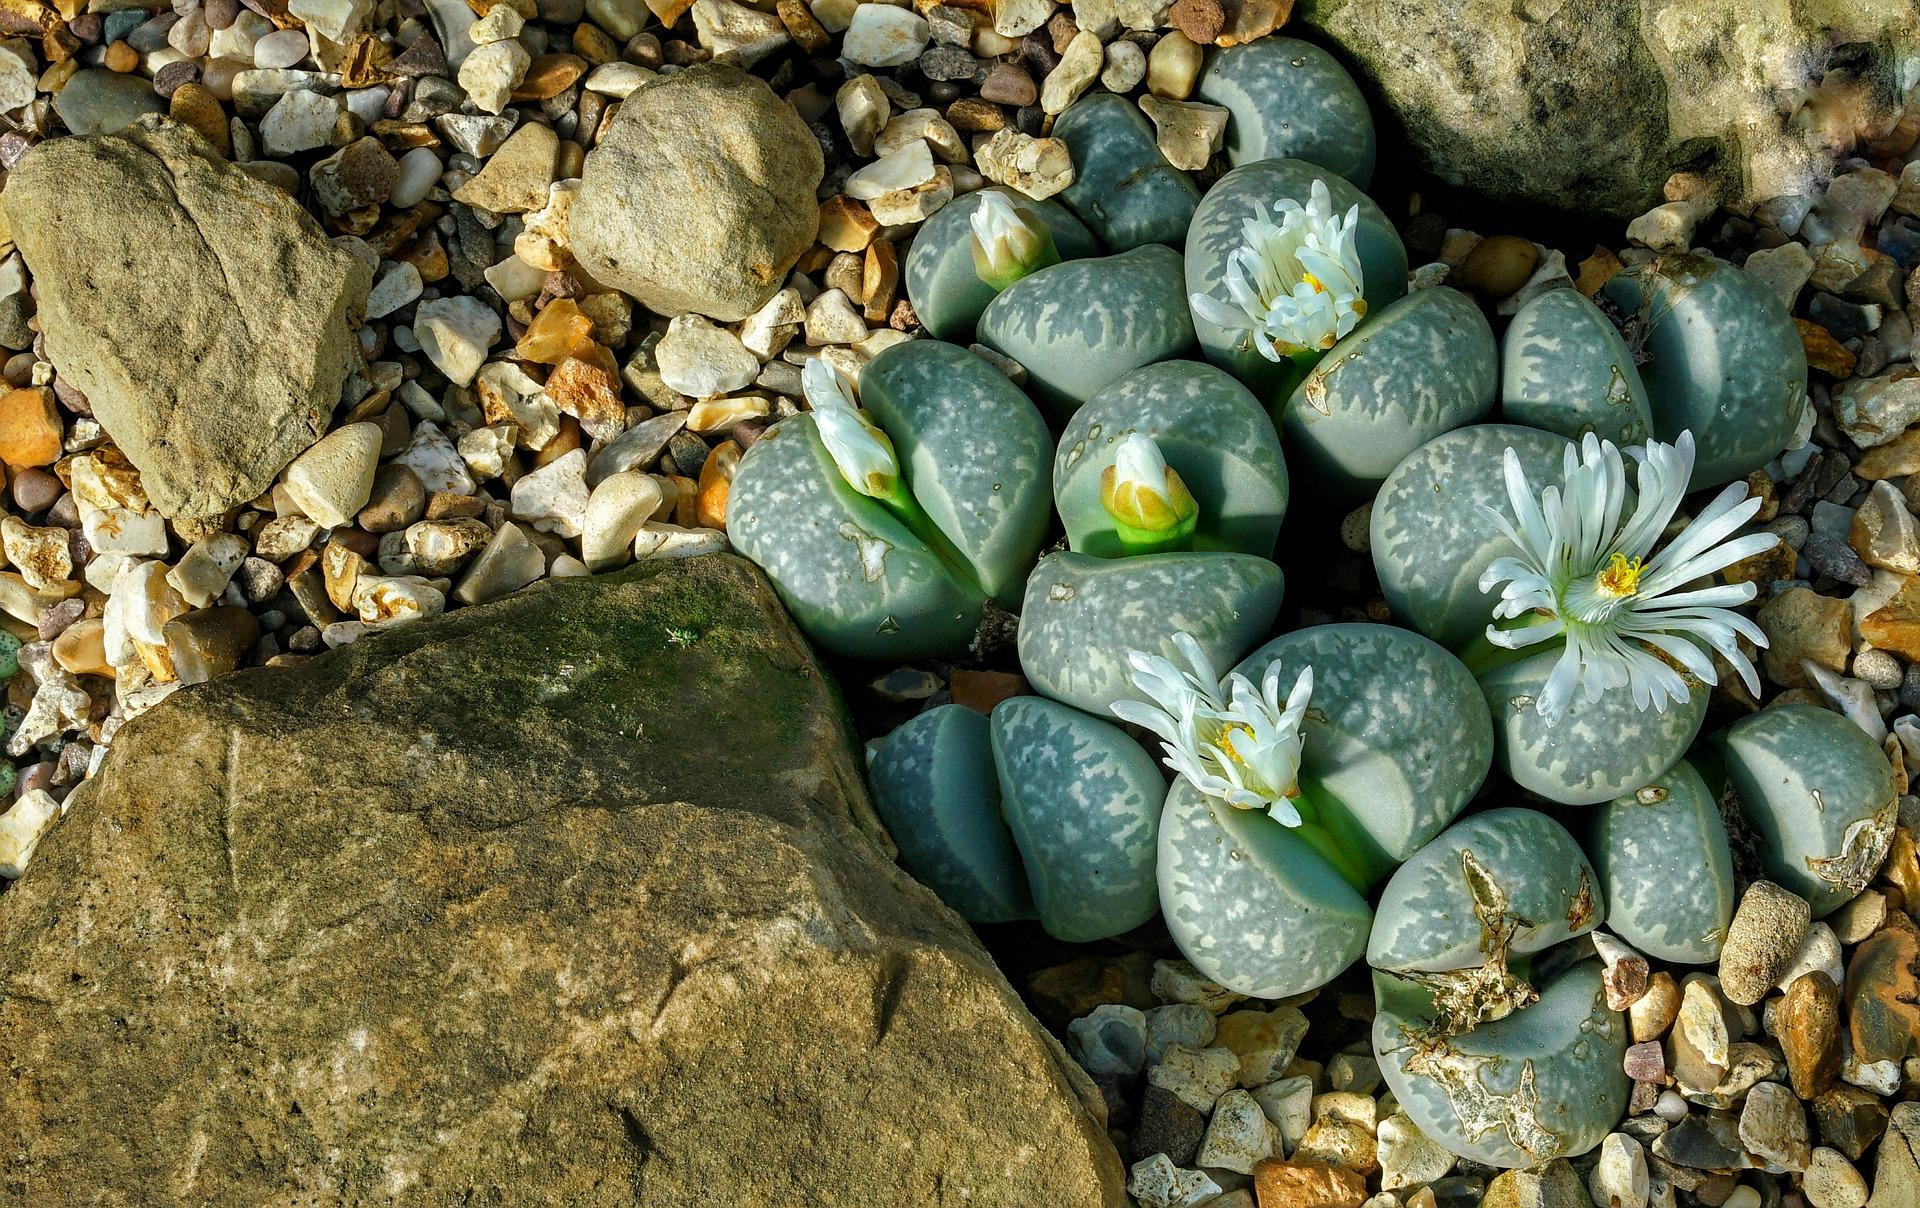 lithops g6b753bbd2 1920 Amazing Planet: Lithops, the World's Most Camouflaged Plant